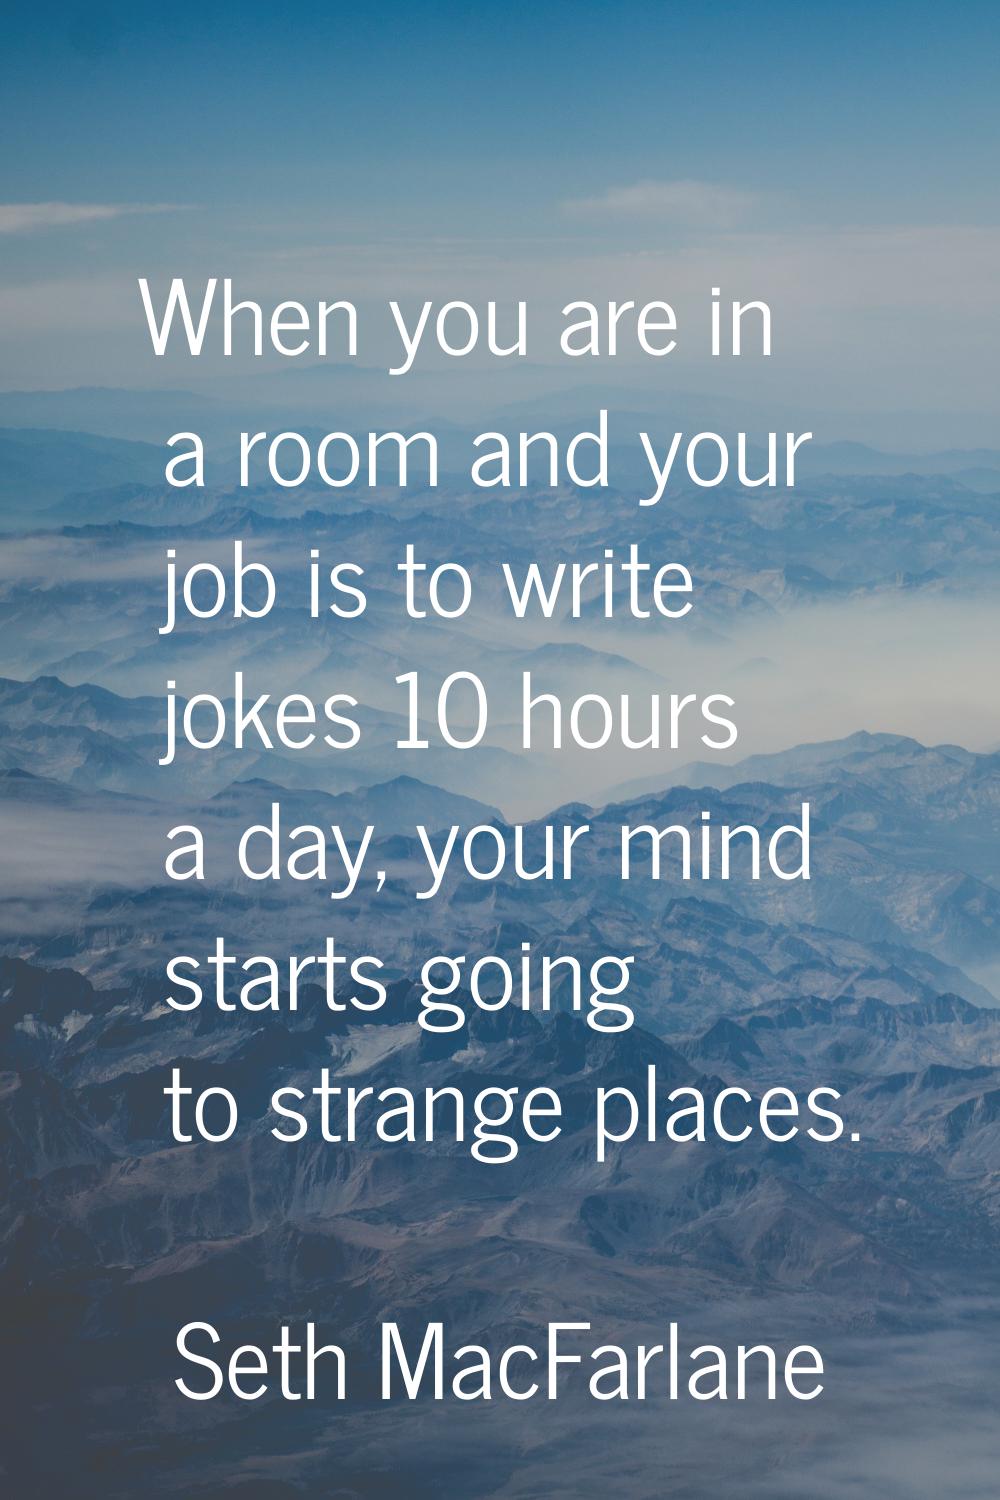 When you are in a room and your job is to write jokes 10 hours a day, your mind starts going to str